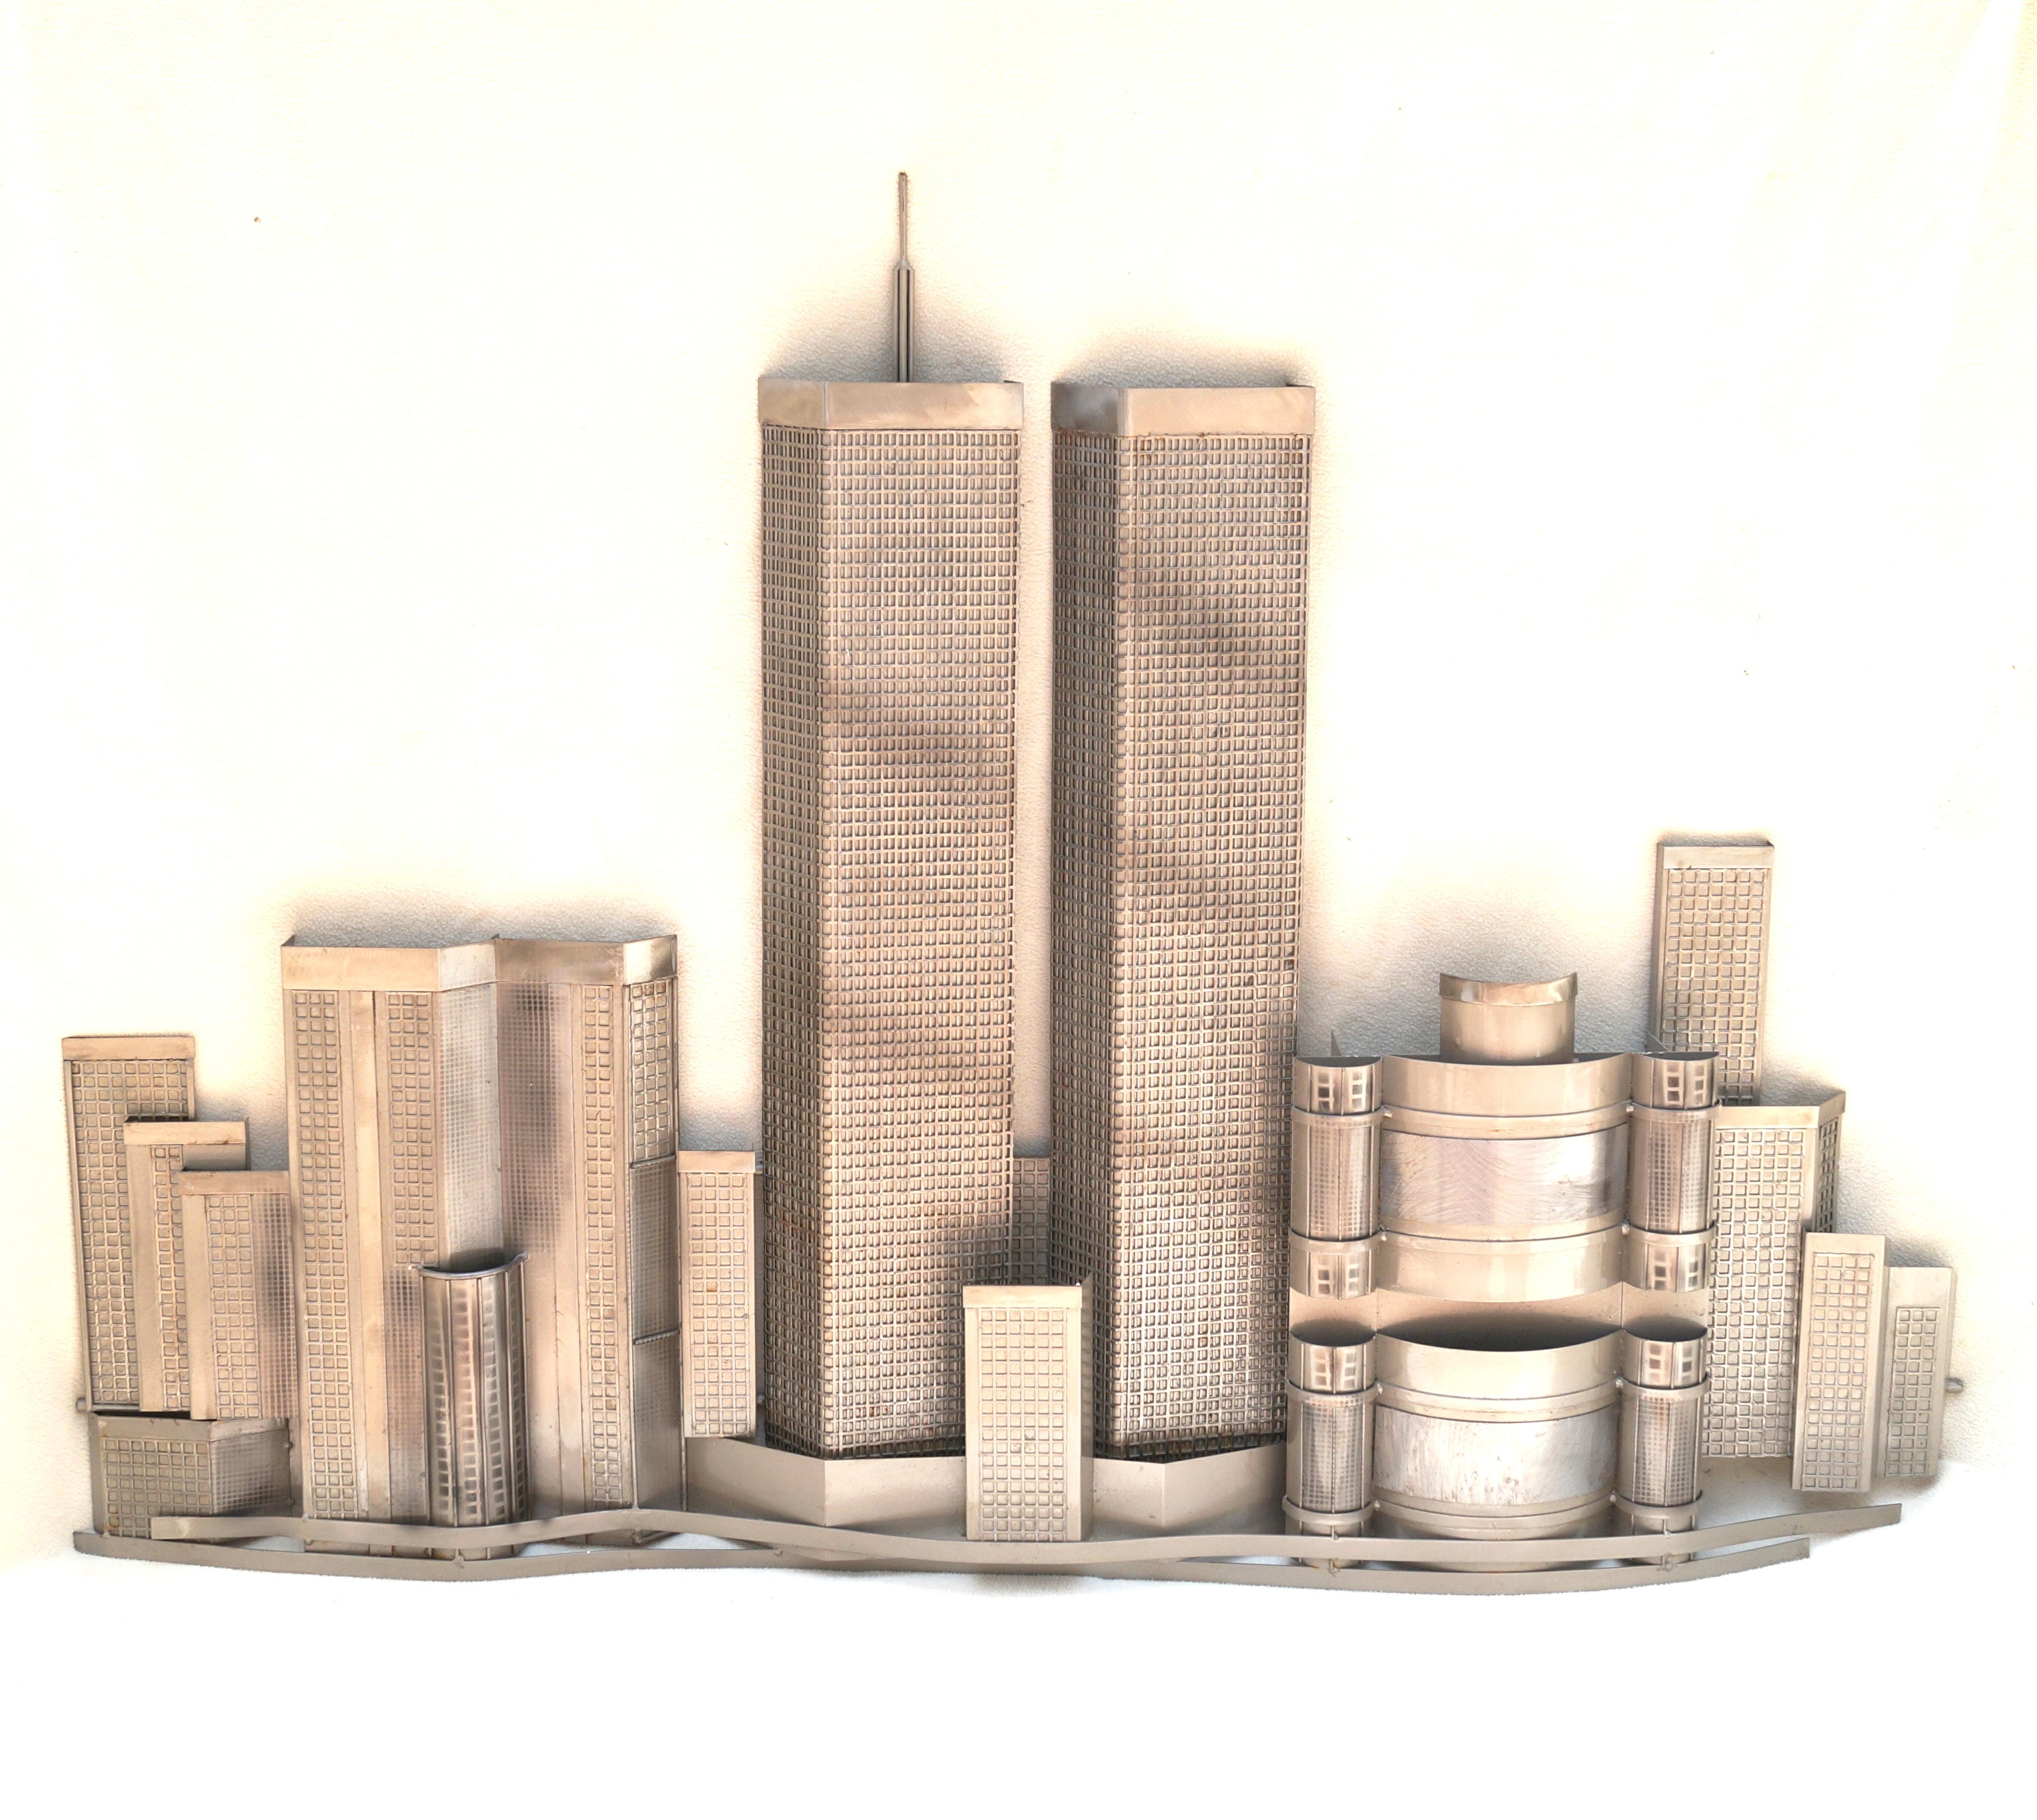 C. Curtis Jere Mid-Century Modern World Trade Center Wall Mount Sculpture / Sculptural Metal Art Twin Towers . Believed to be from 2001 . The Signature and date is difficult to see as it is worn from age and cleaning .  If you are in the NJ /NYC